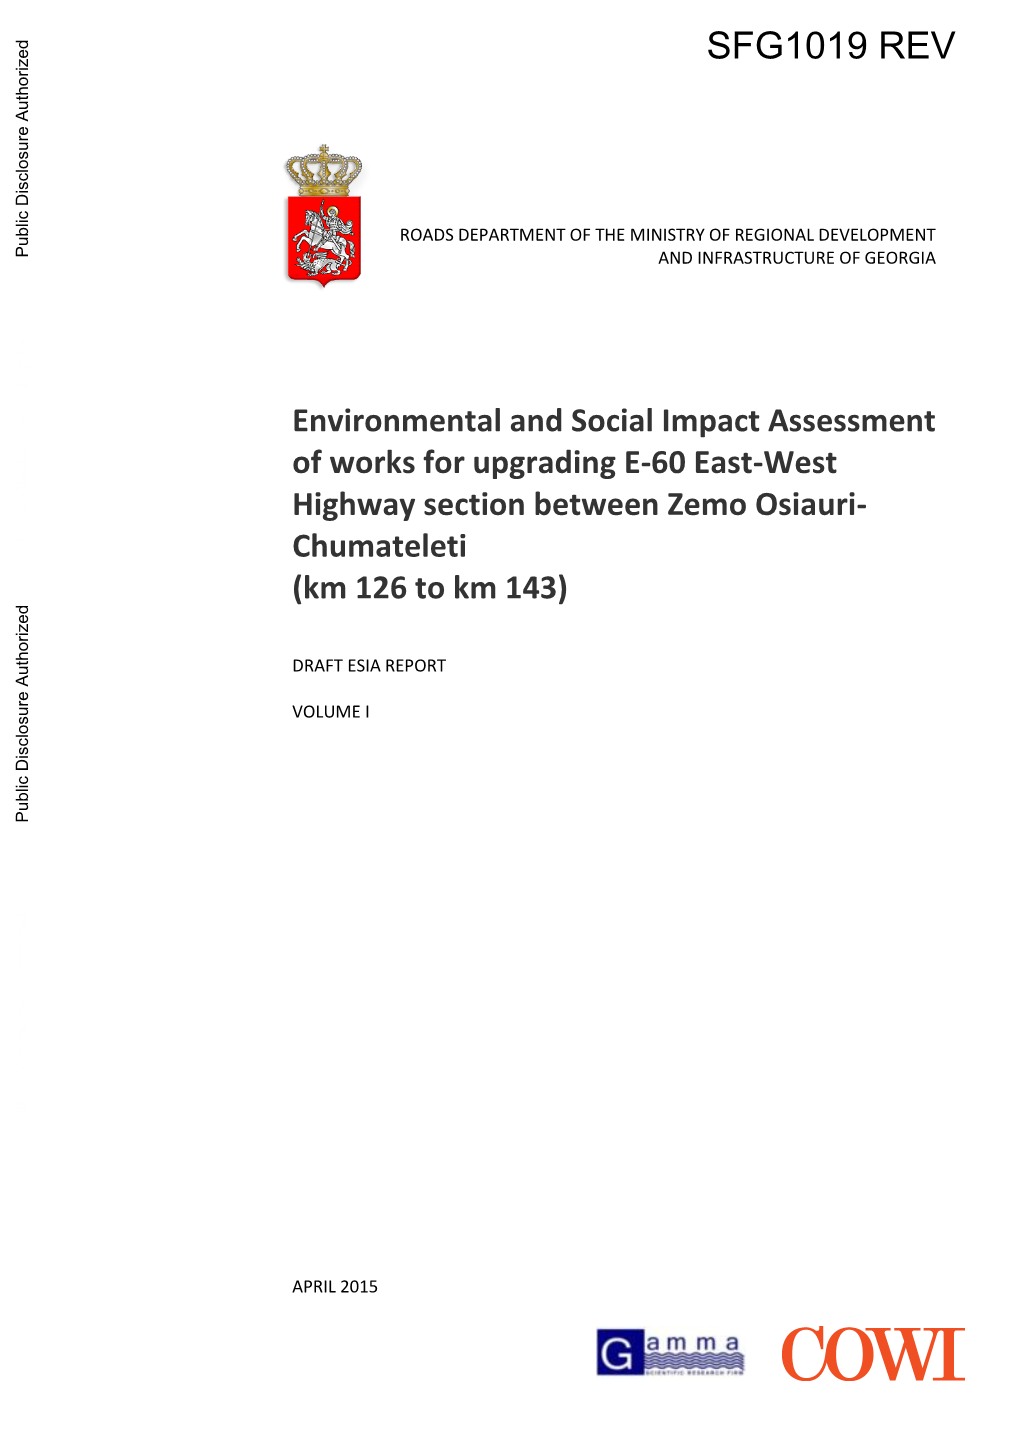 Environmental and Social Impact Assessment of Works for Upgrading E-60 East-West Highway Section Between Zemo Osiauri